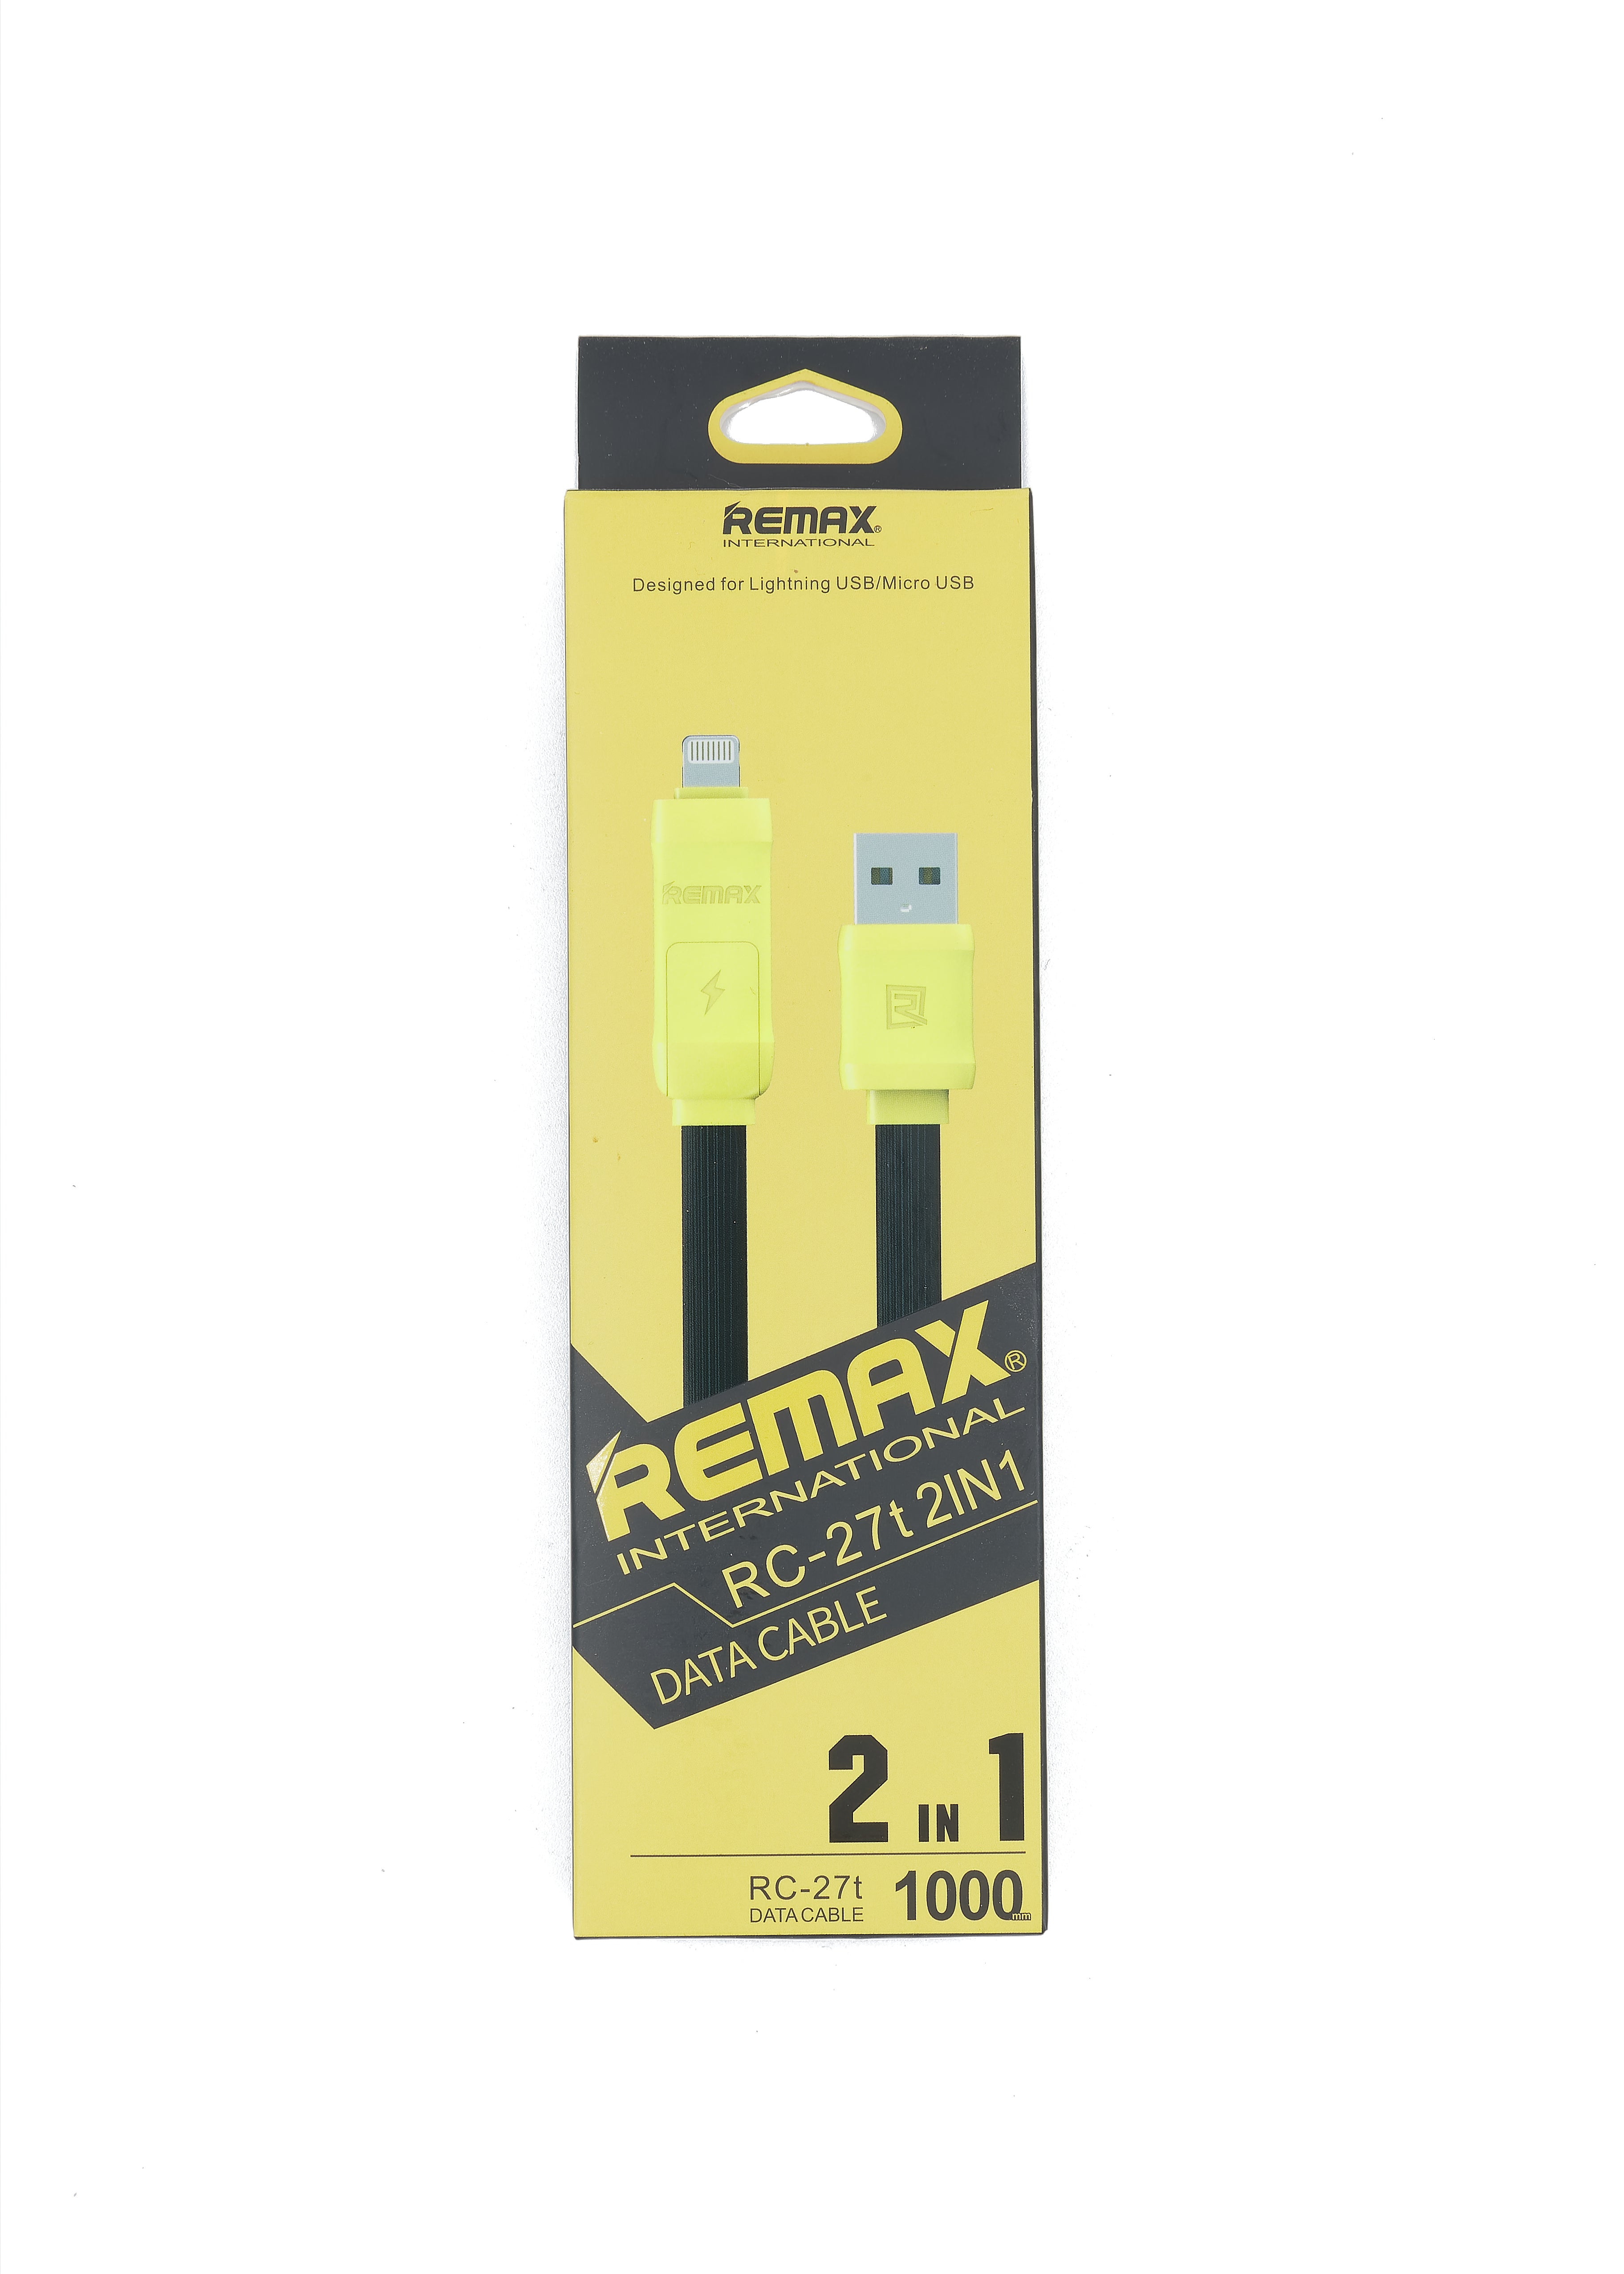 REMAX 2 in1 Data Cable | RC-27t